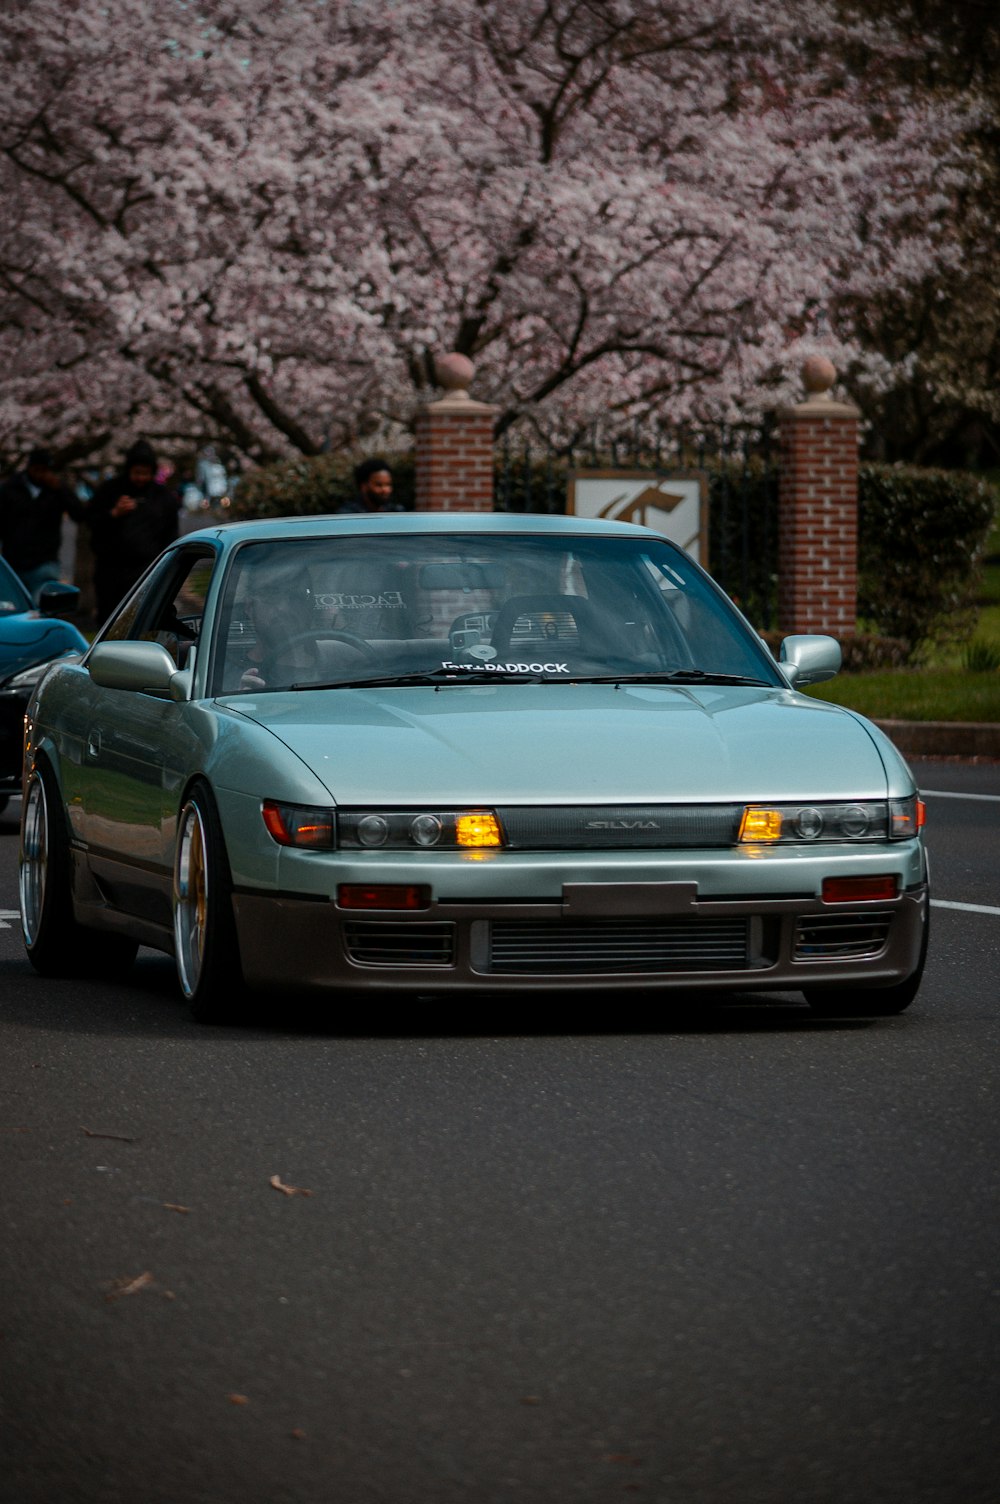 a blue car driving down a street next to a cherry blossom tree